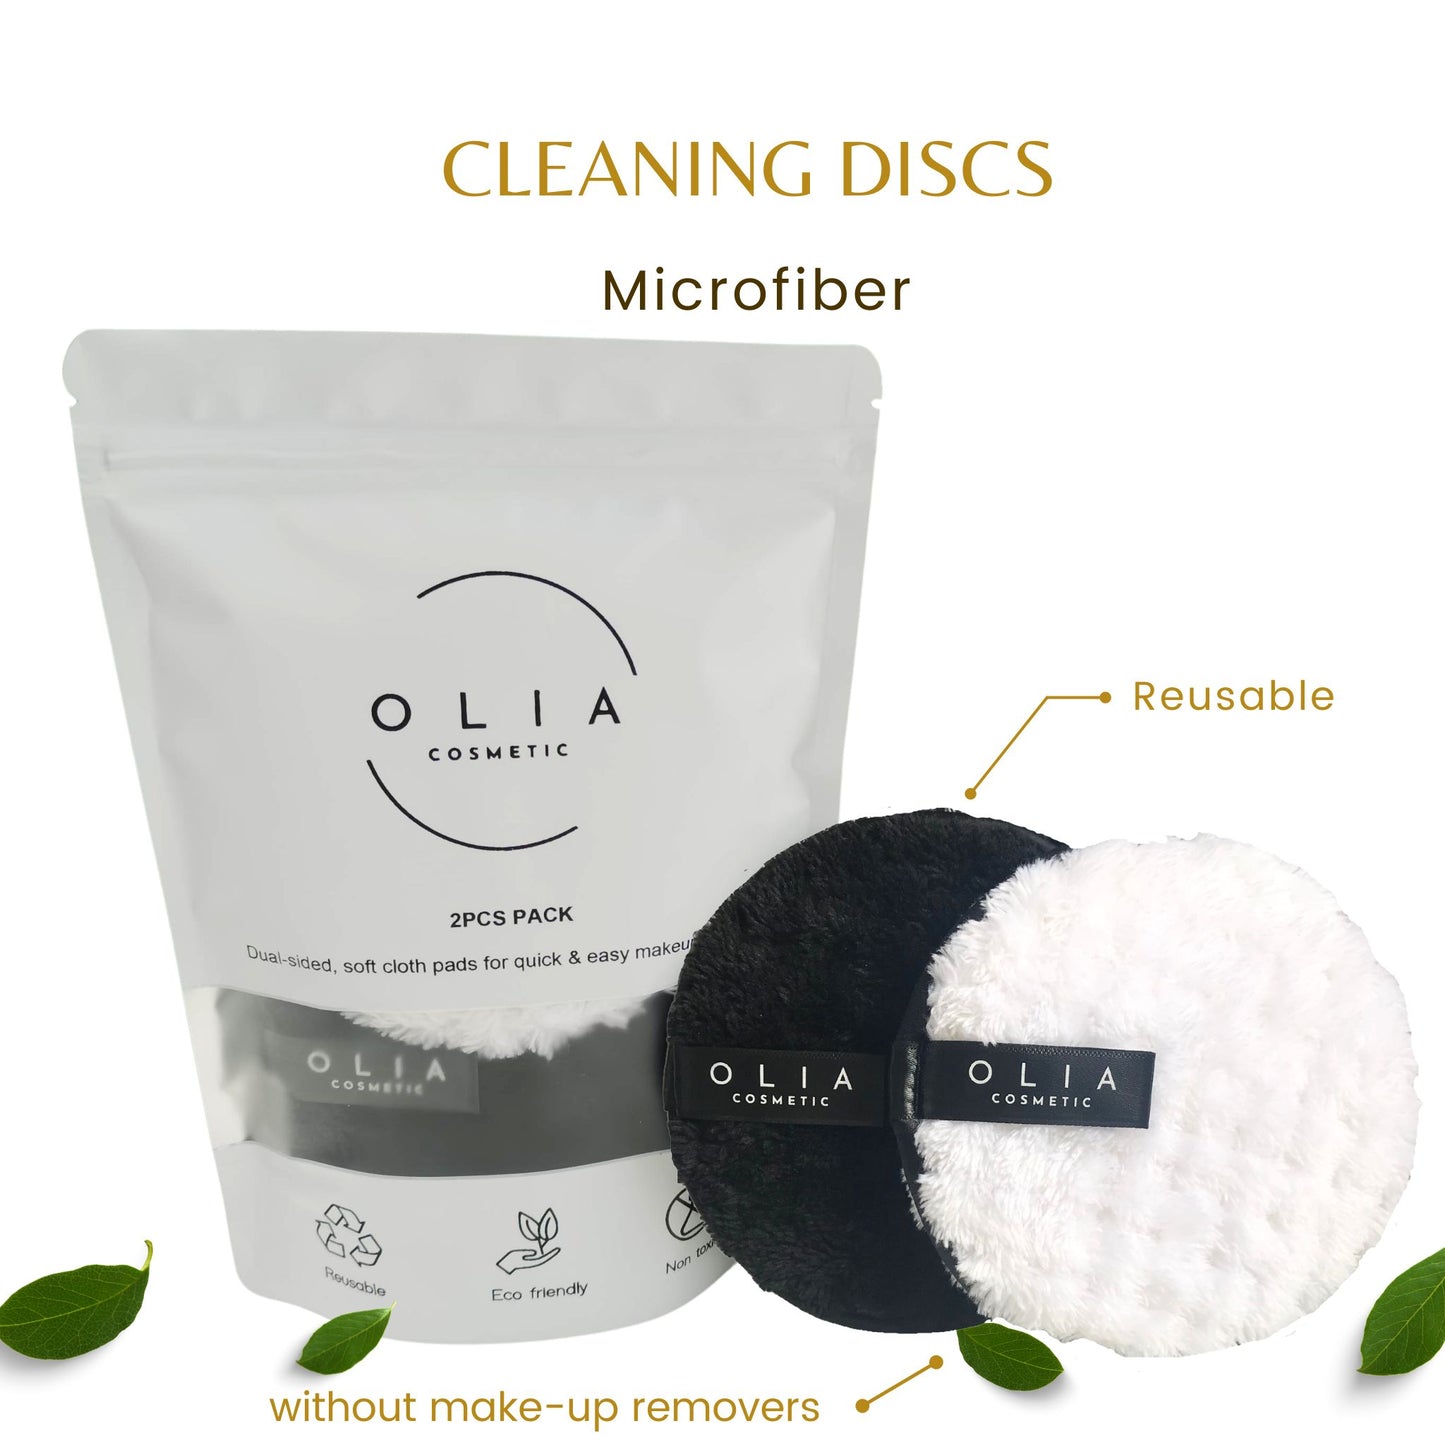 Reusable cleaning discs